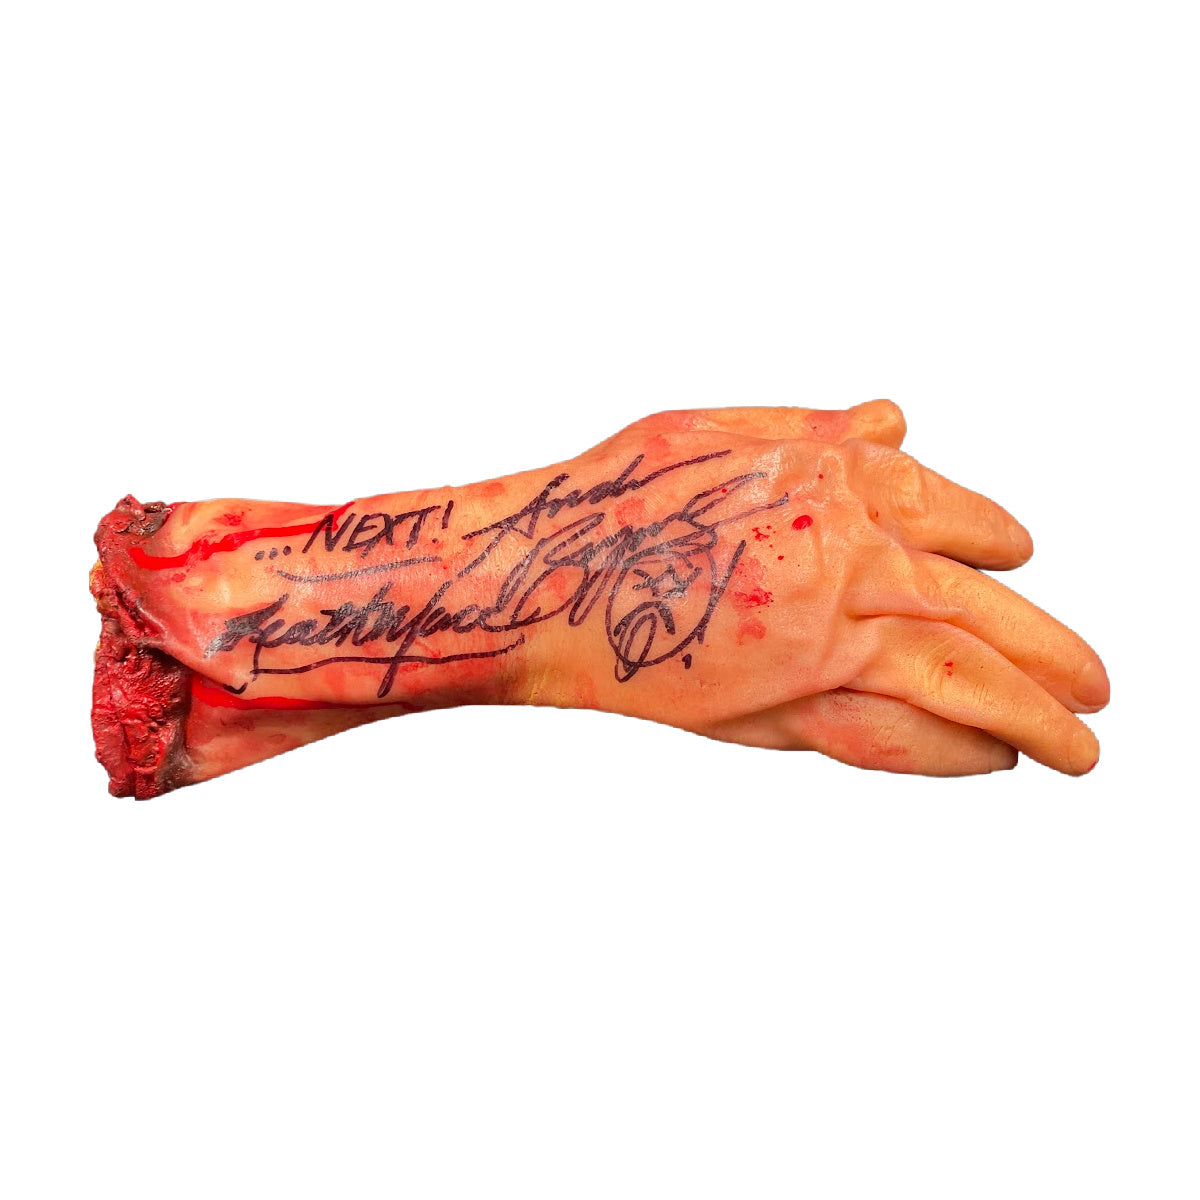 Andrew Bryniarski Signed Prop Texas Chainsaw Massacre Leatherface Autographed JSA